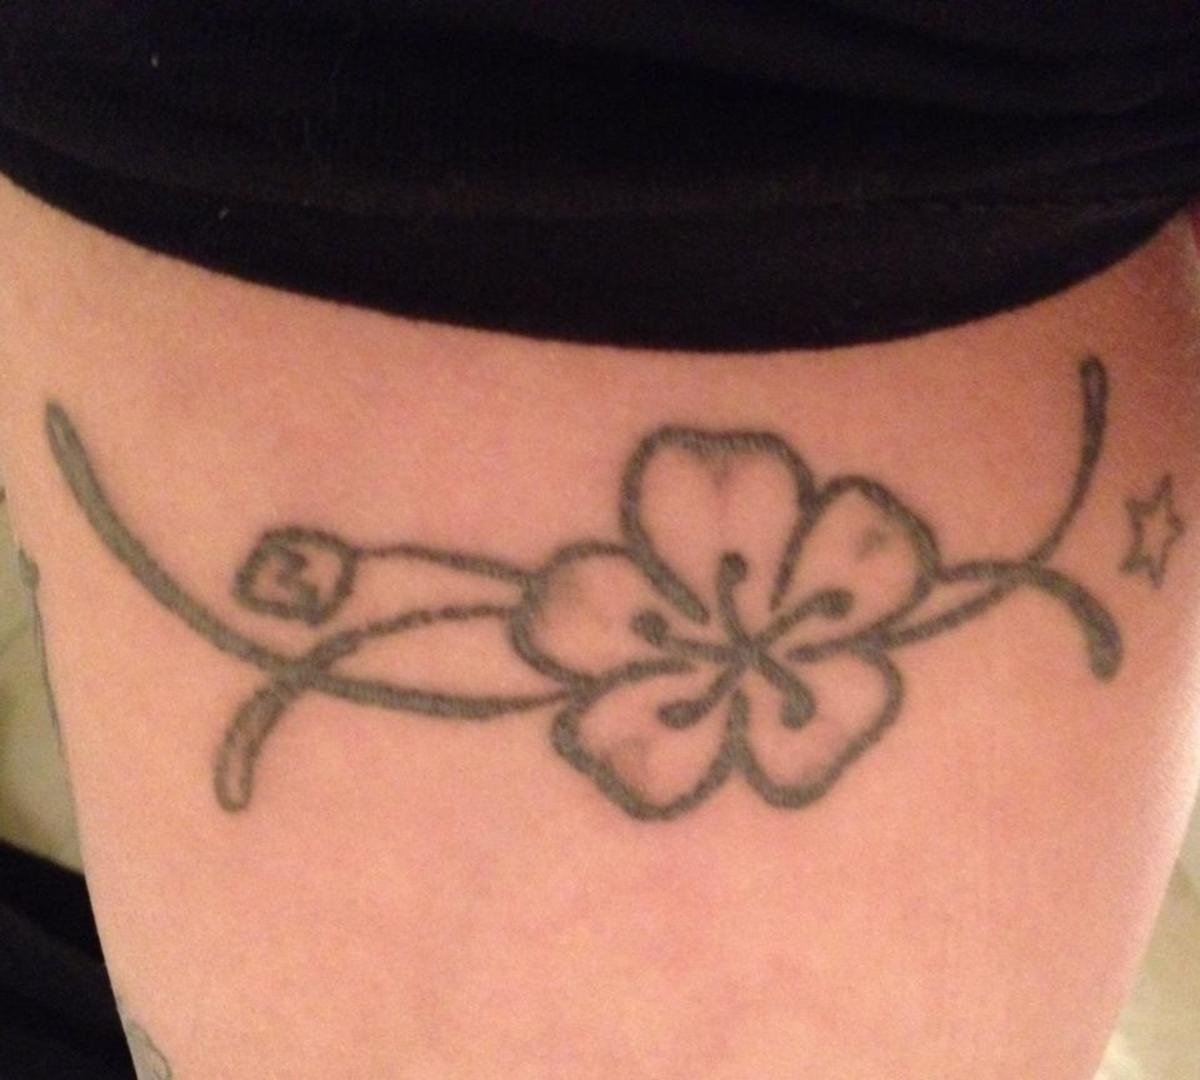 This badly scarred tattoo has had 3 sessions of laser treatment, and will ultimately leave a permanent scar.